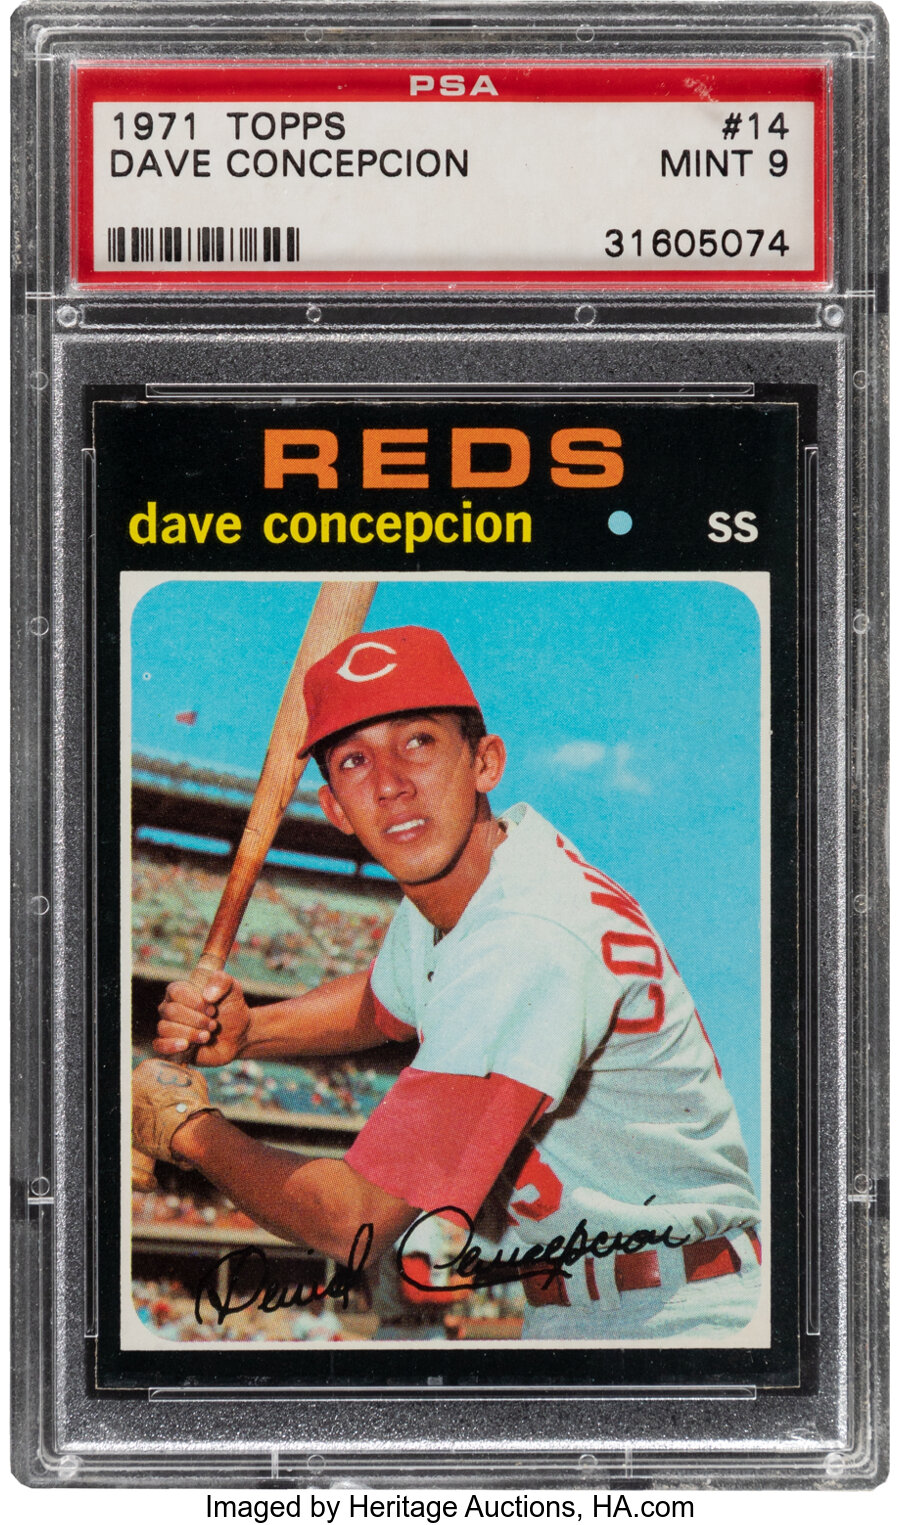 1971 Topps Dave Concepcion Rookie #14 PSA Mint 9 - None Higher!